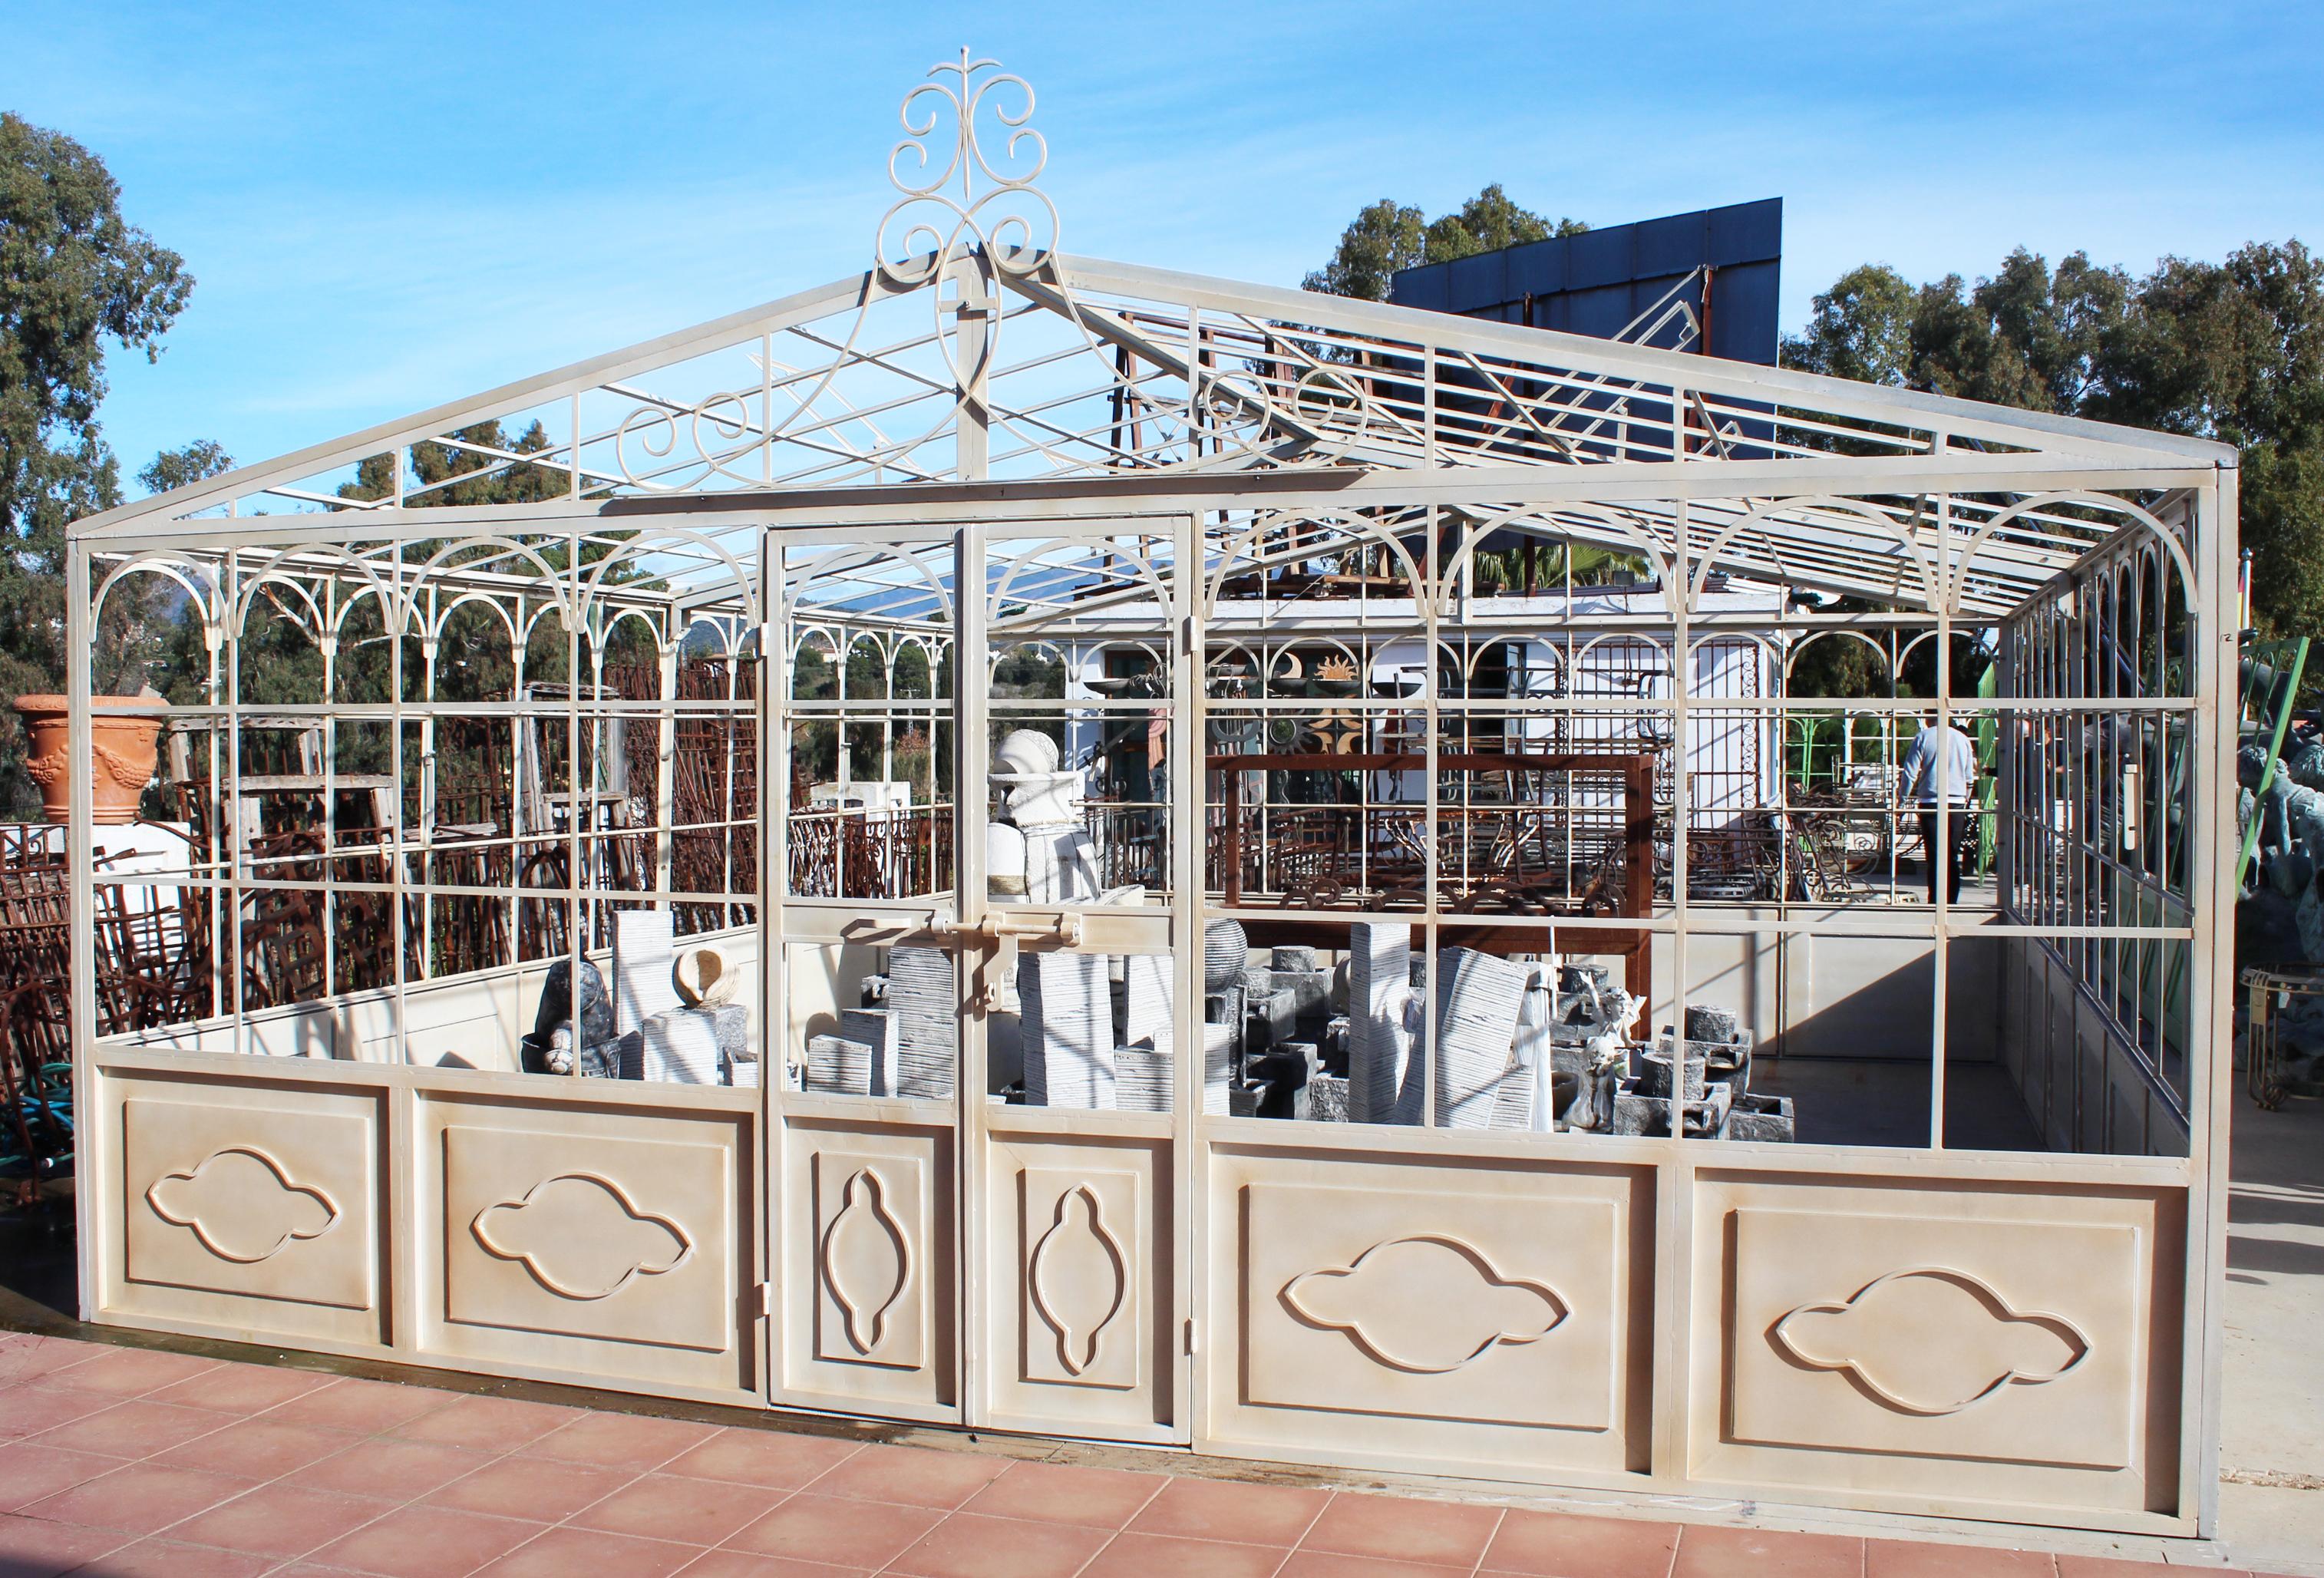 French style wrought iron greenhouse with doors and windows that open outwards. Ready for glass panels to be installed.